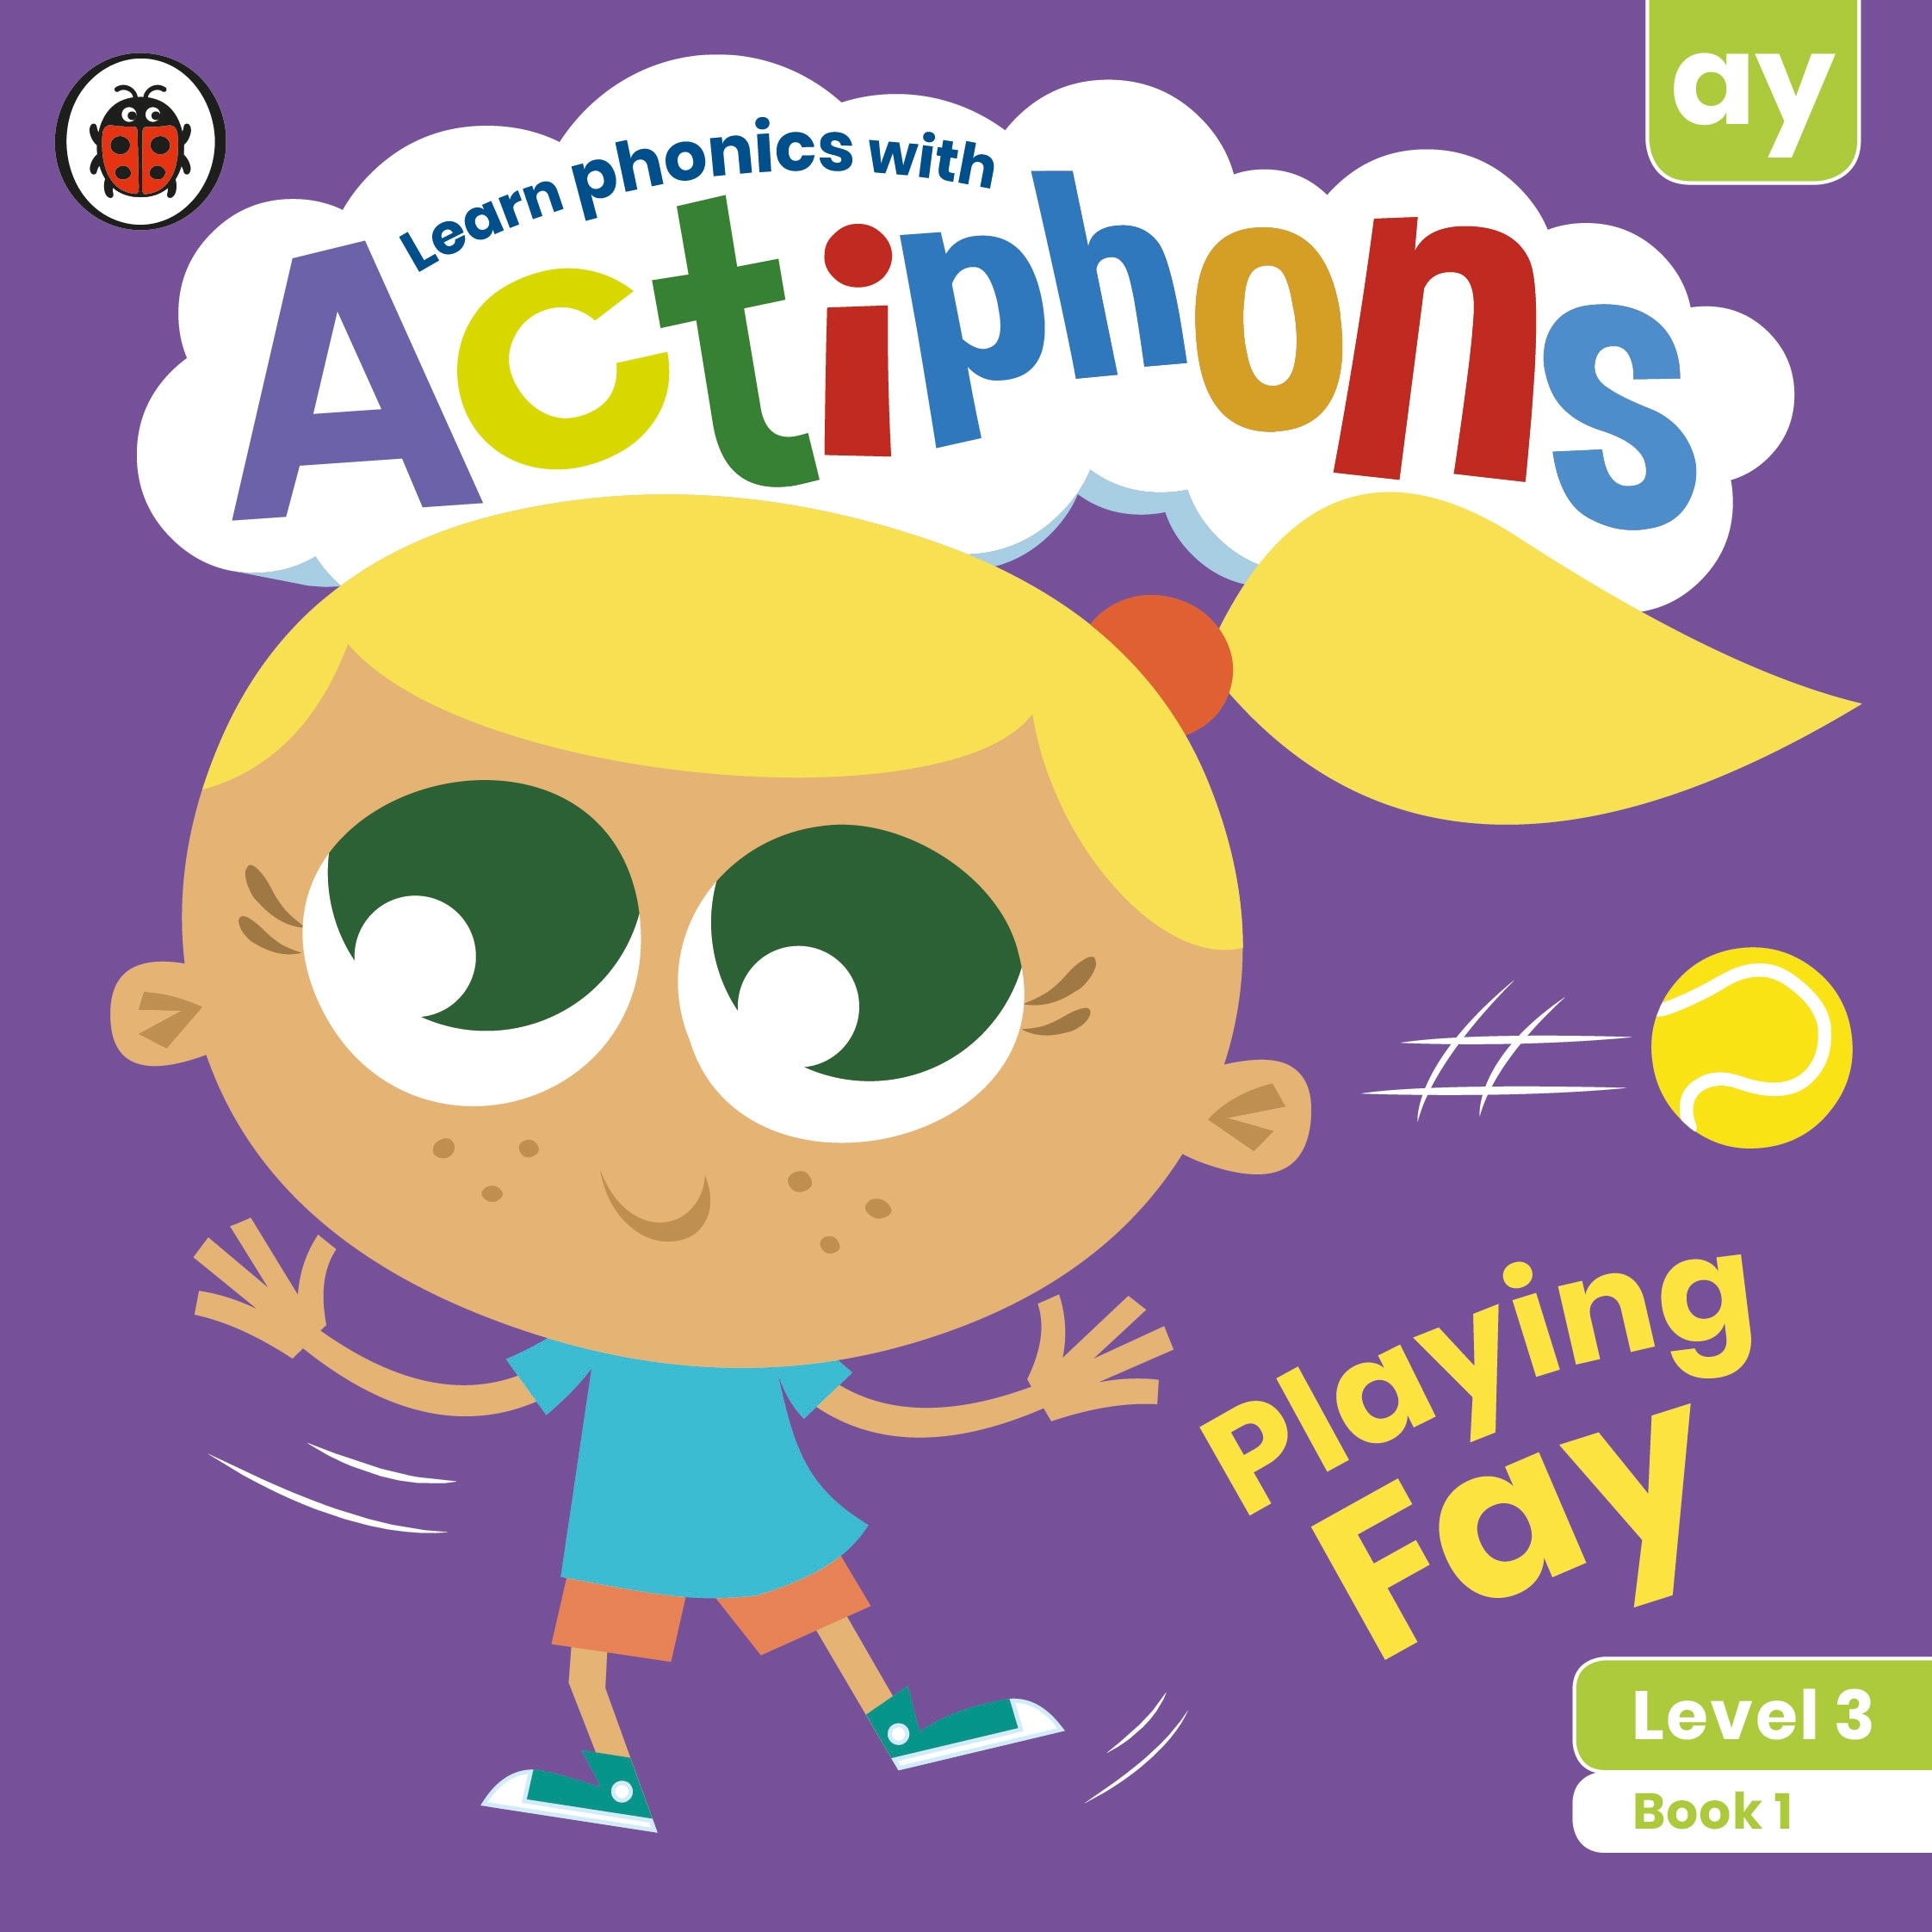 Actiphons Level 3 Book 1 Playing Fay